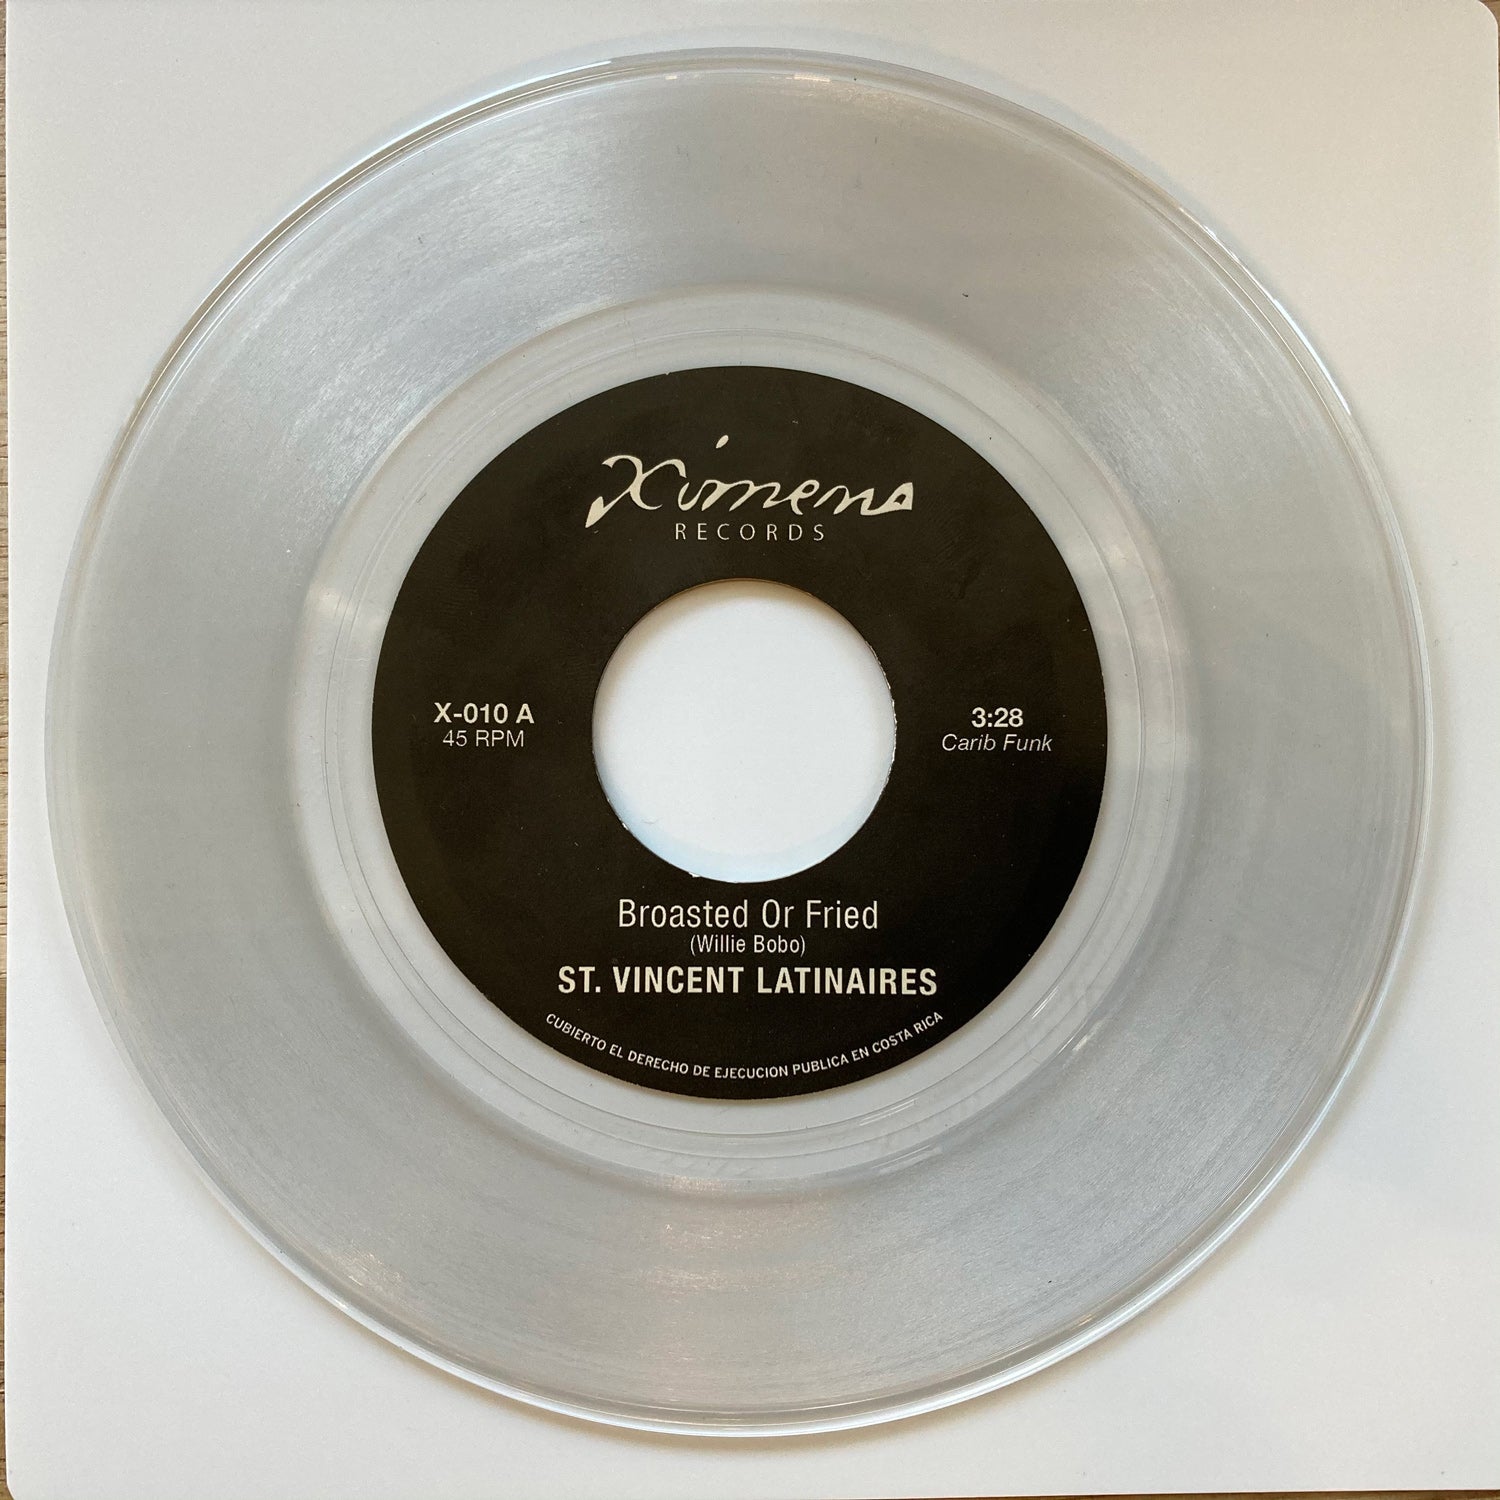 St. Vincent Latinaires - Broasted or Fried / Mudies All Stars - Loran's Dance (7")